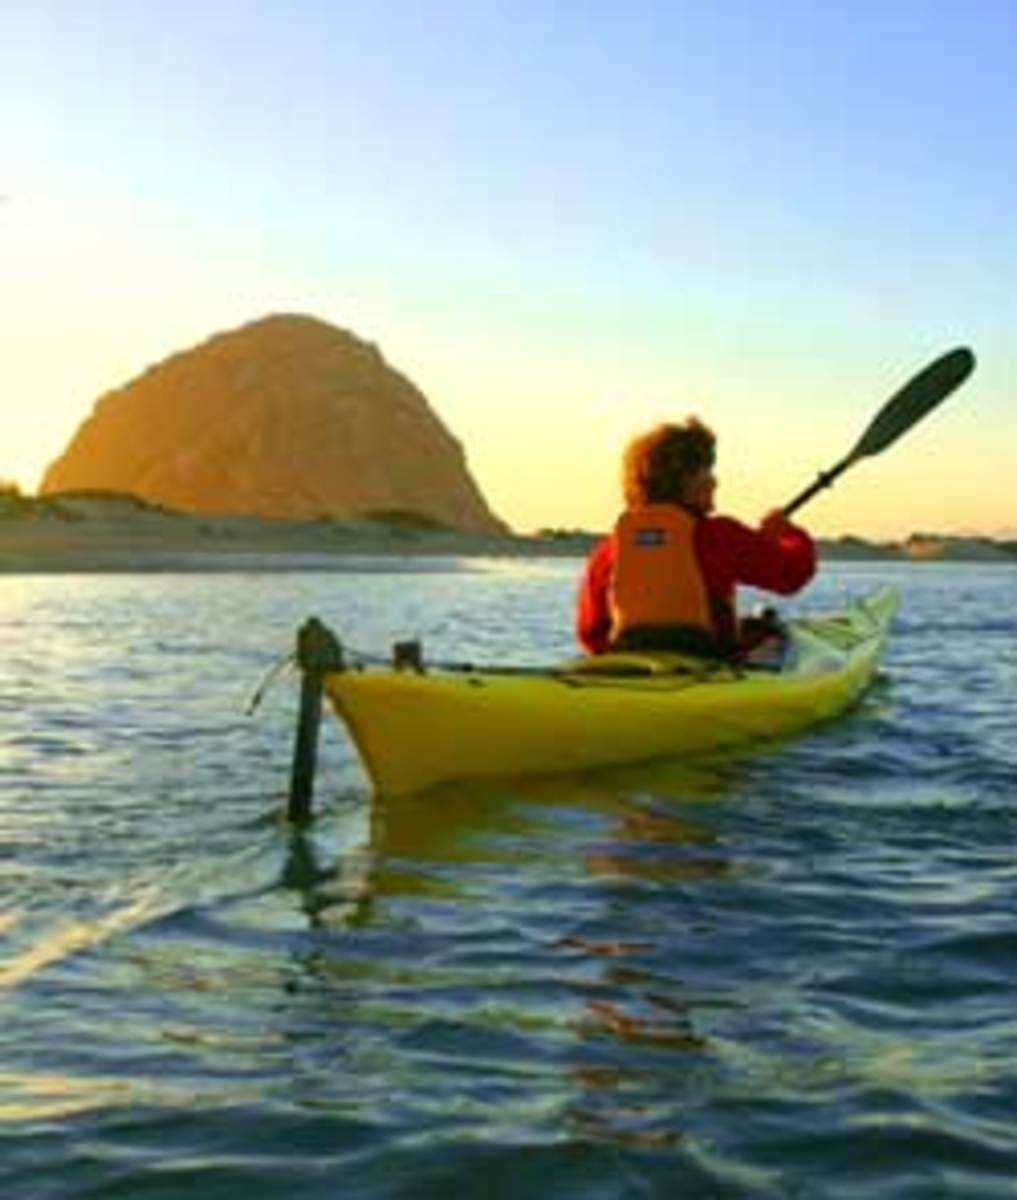 all-things-morro-bay-on-the-central-california-coast